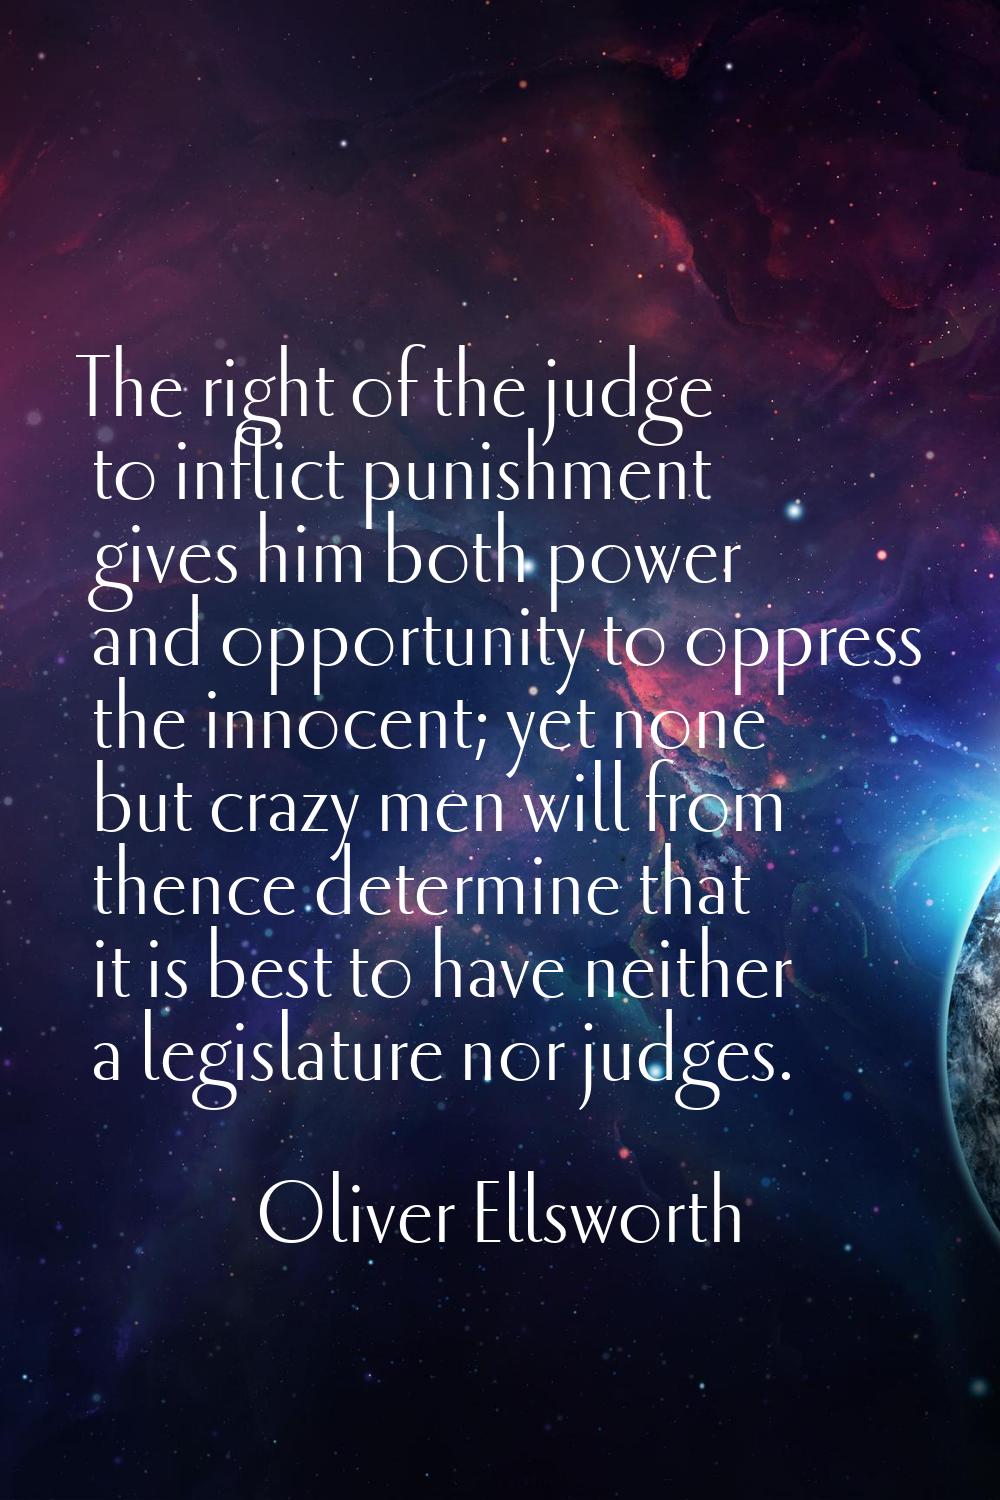 The right of the judge to inflict punishment gives him both power and opportunity to oppress the in